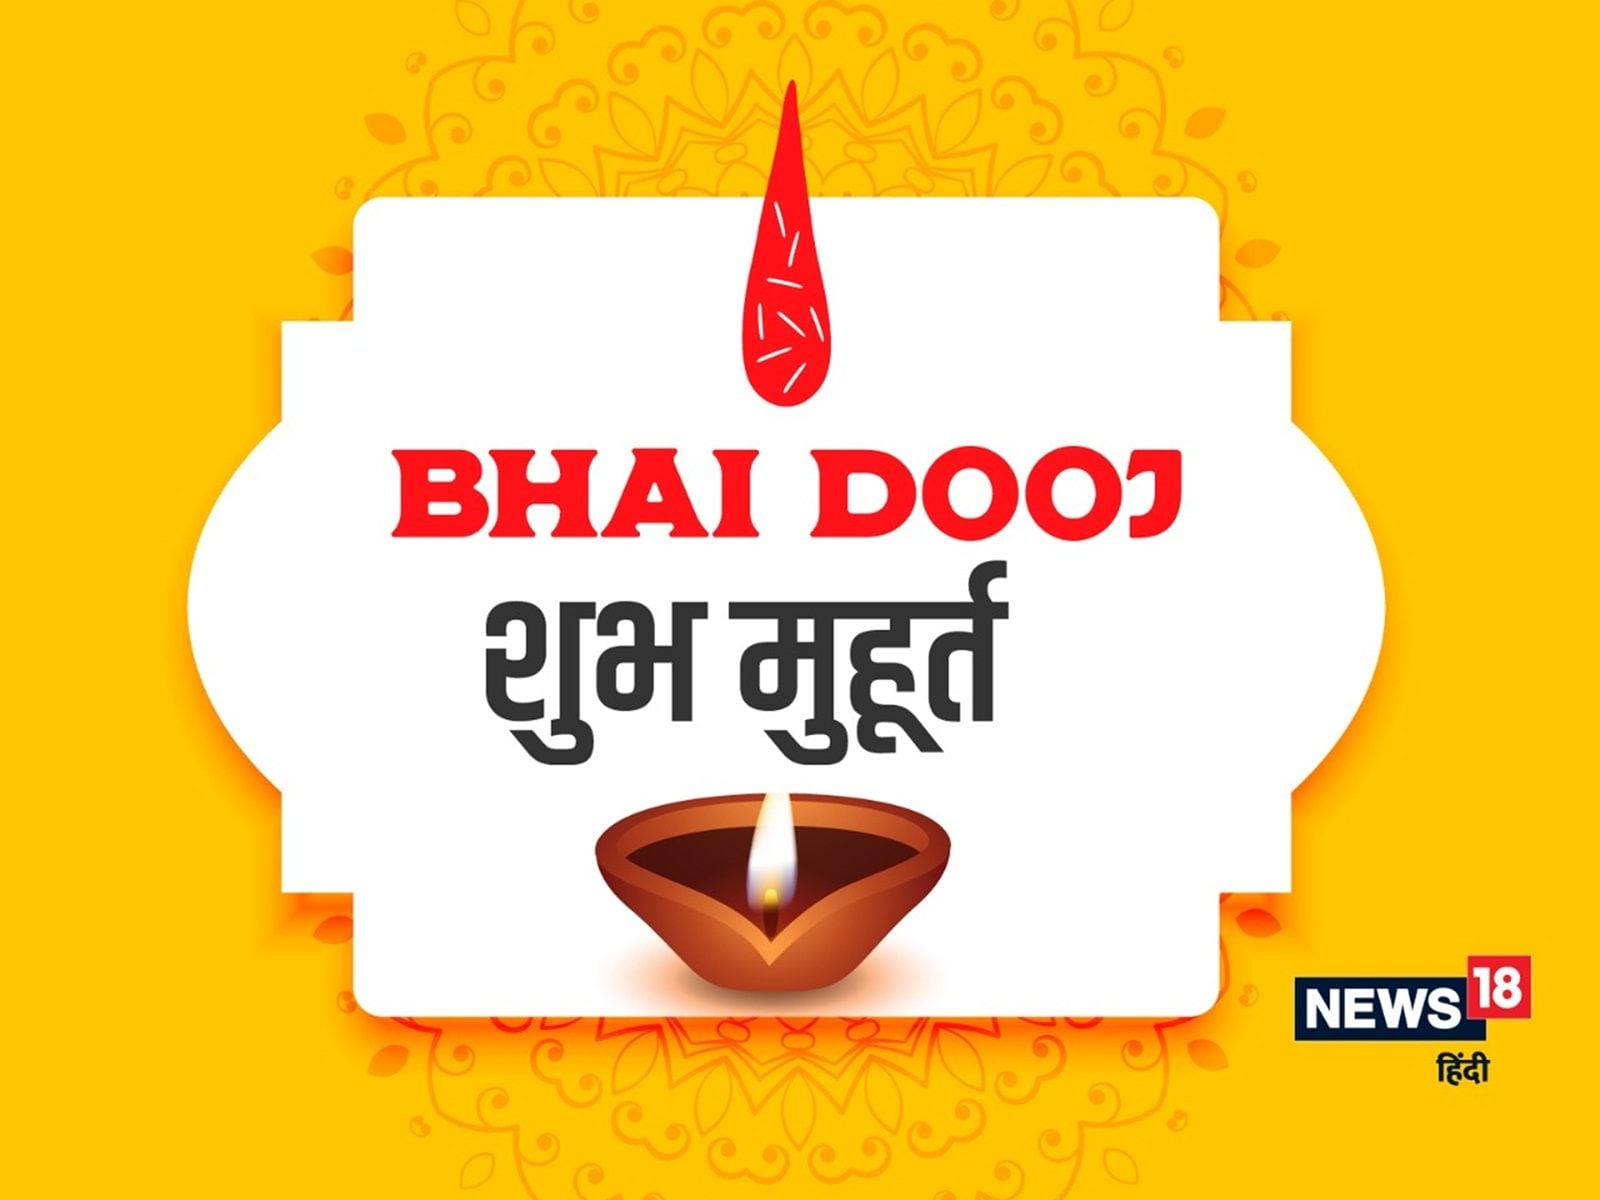 Shubh Muhurat for marriage in 2023 According to the Astrologer – Bejan  Daruwalla